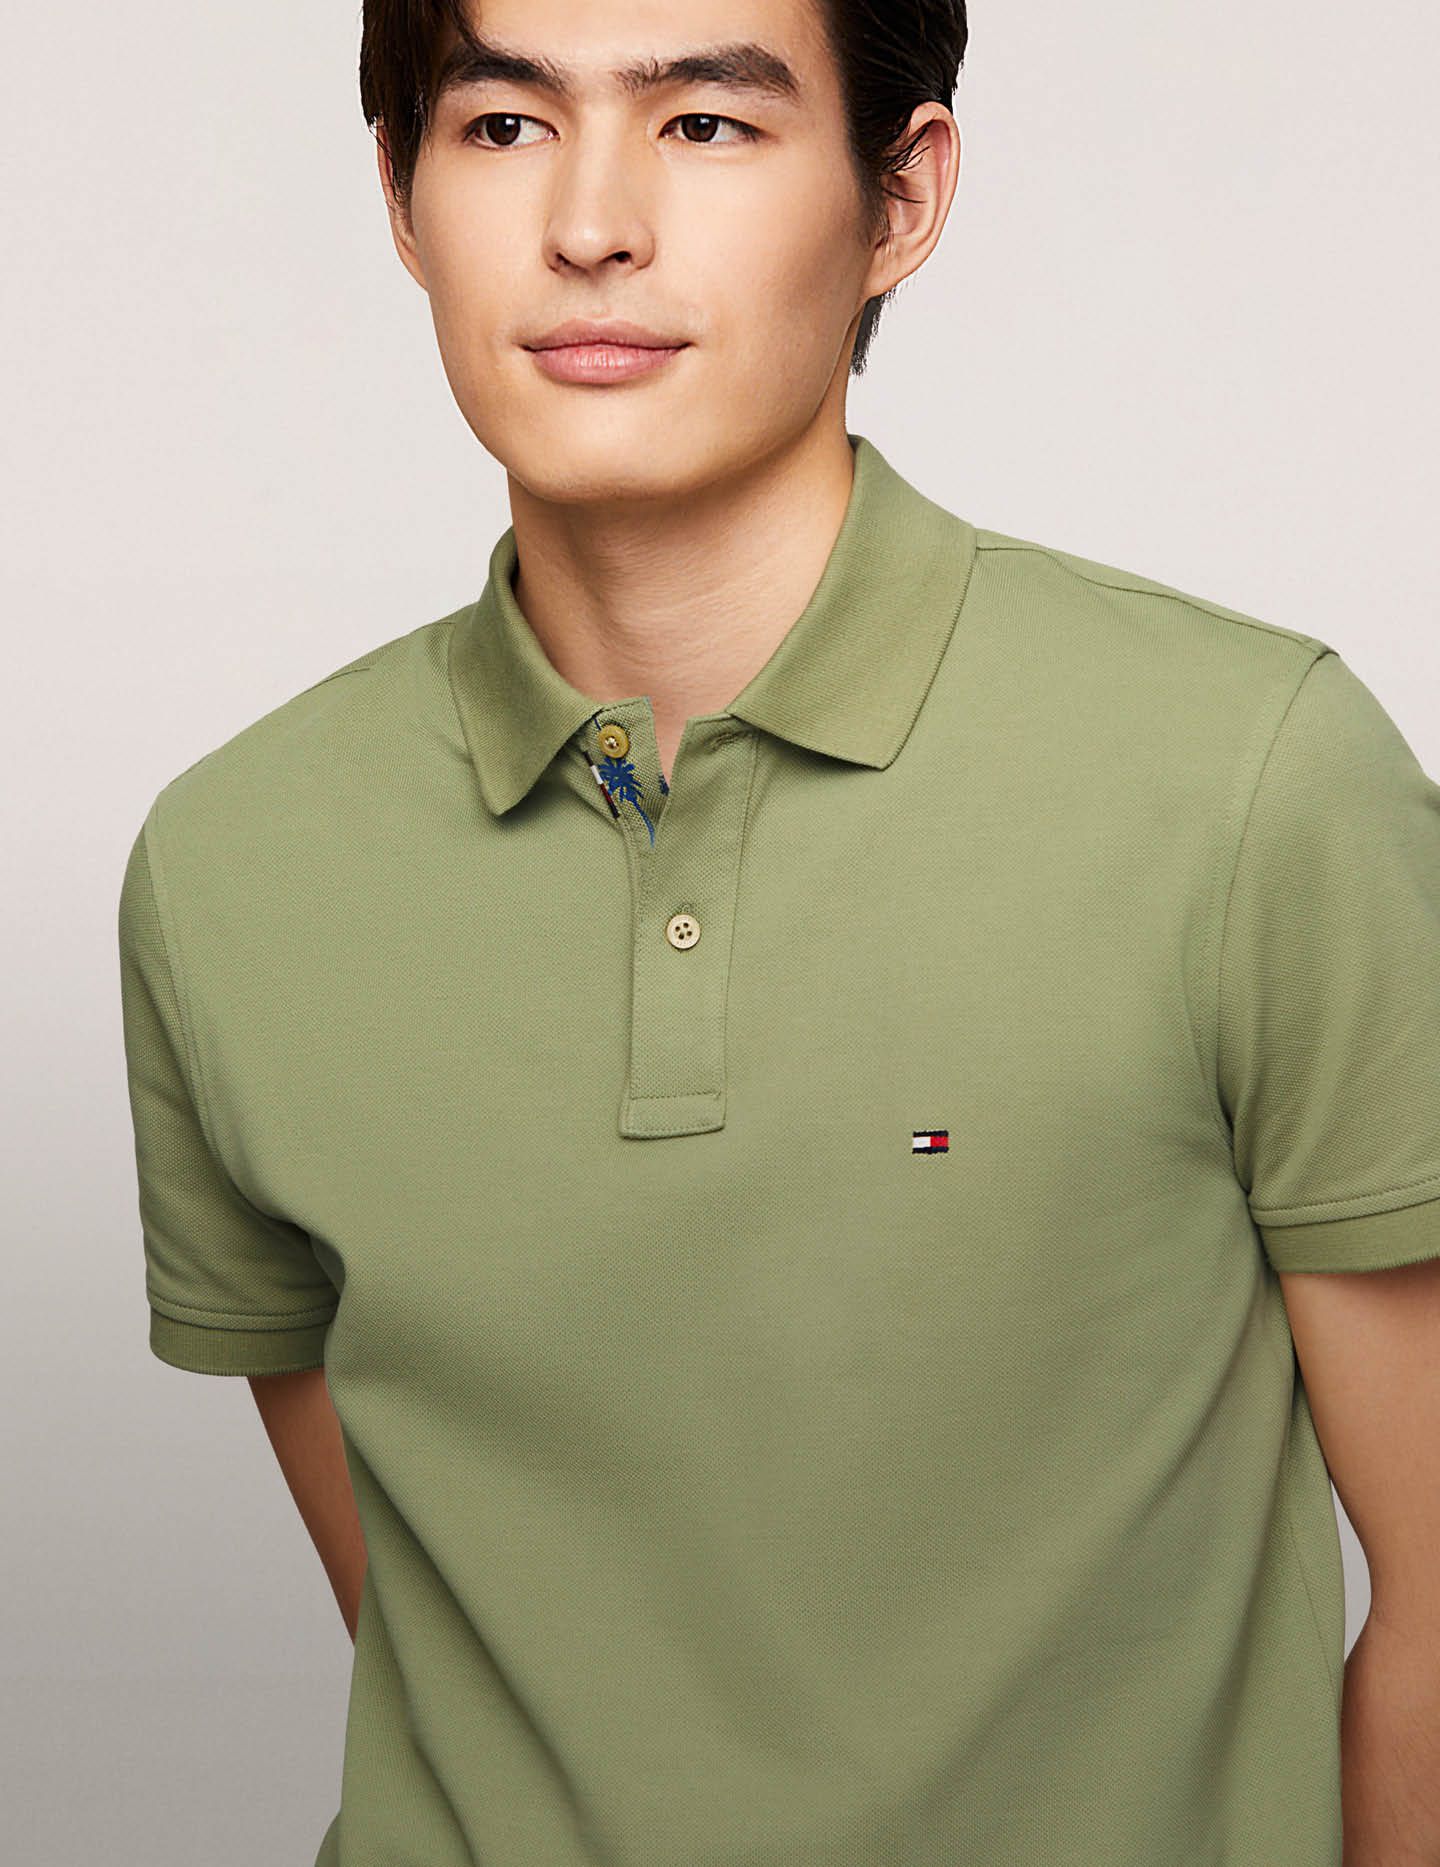 Tommy Hilfiger Men's Sale Polos Up to 40% Off